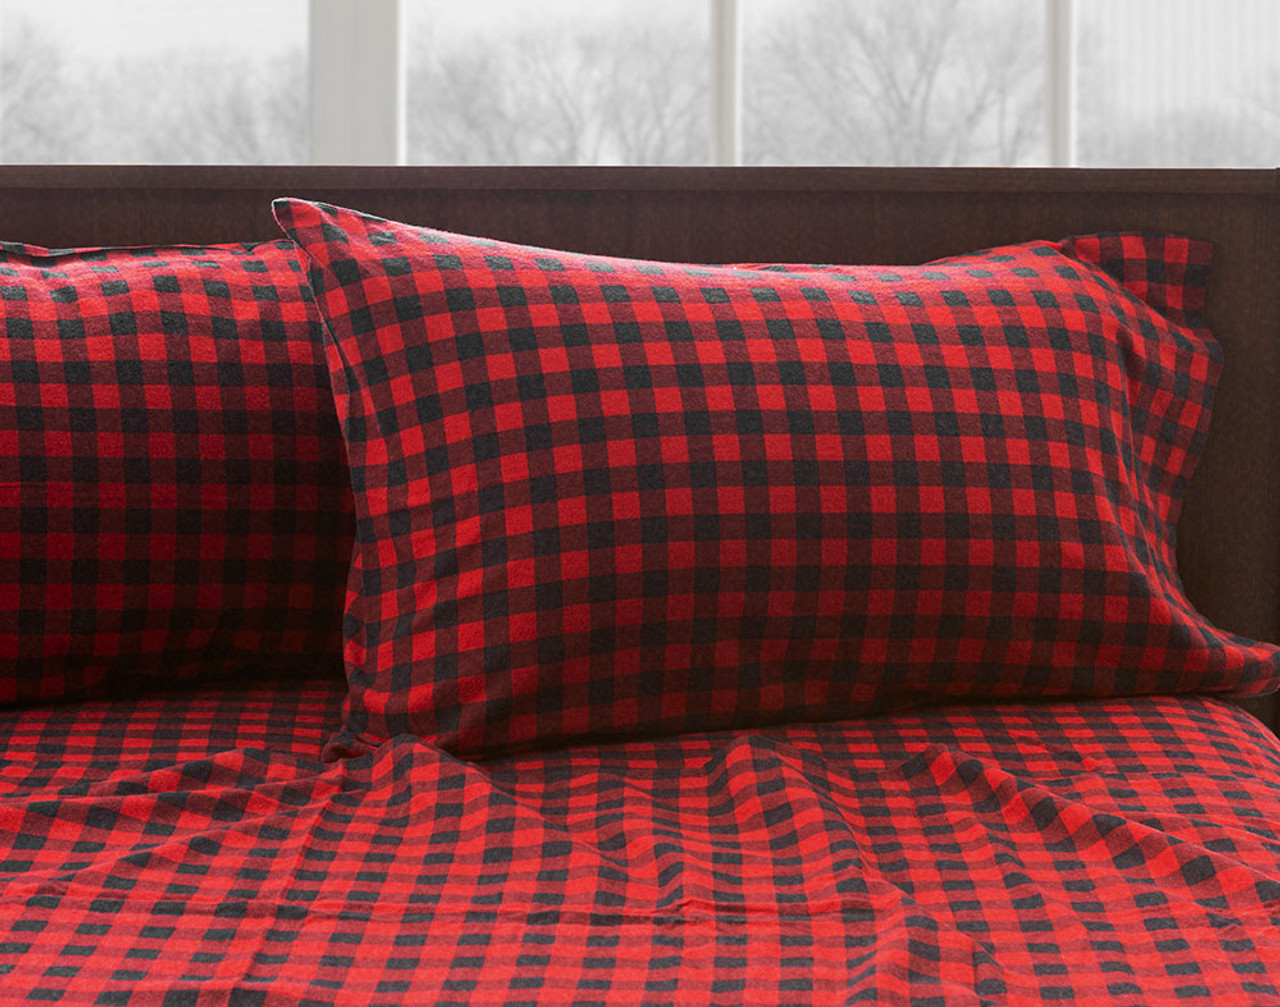 Our red Flannel Cotton Sheet Set in Buffalo dressed over a bed.